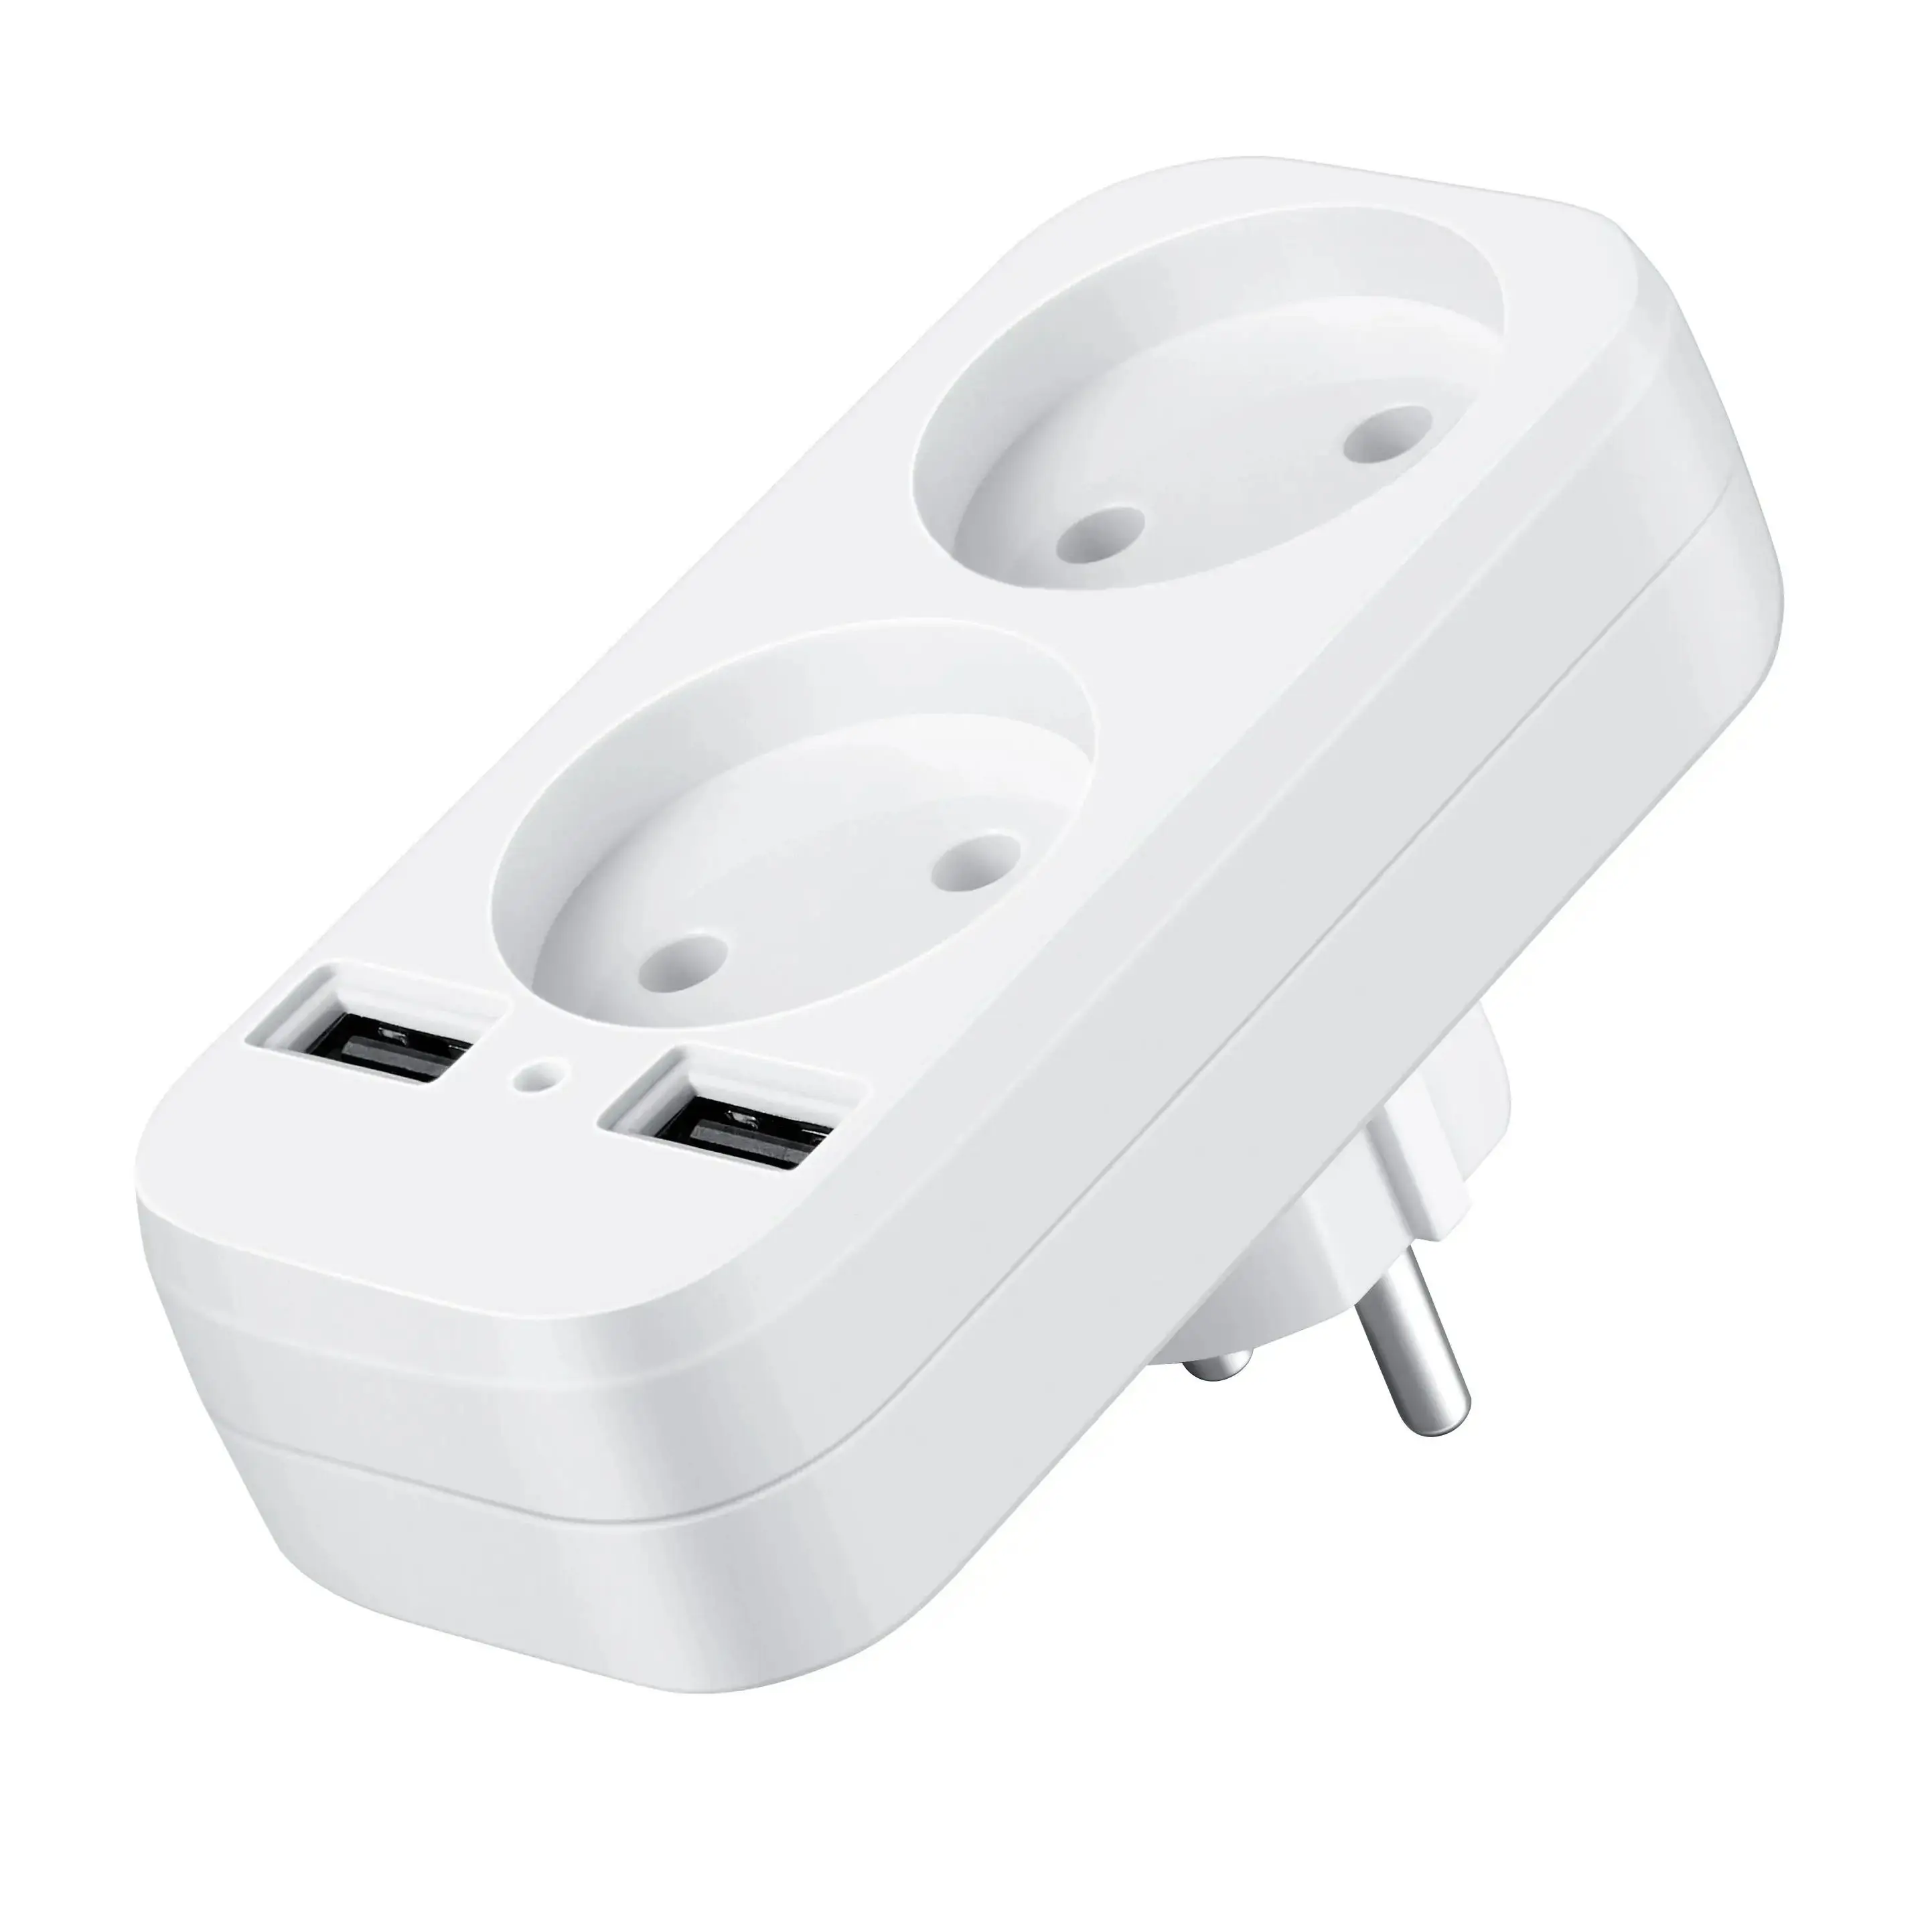 European style dual socket with dual USB 5V 2A output, plug adapter, free shipping